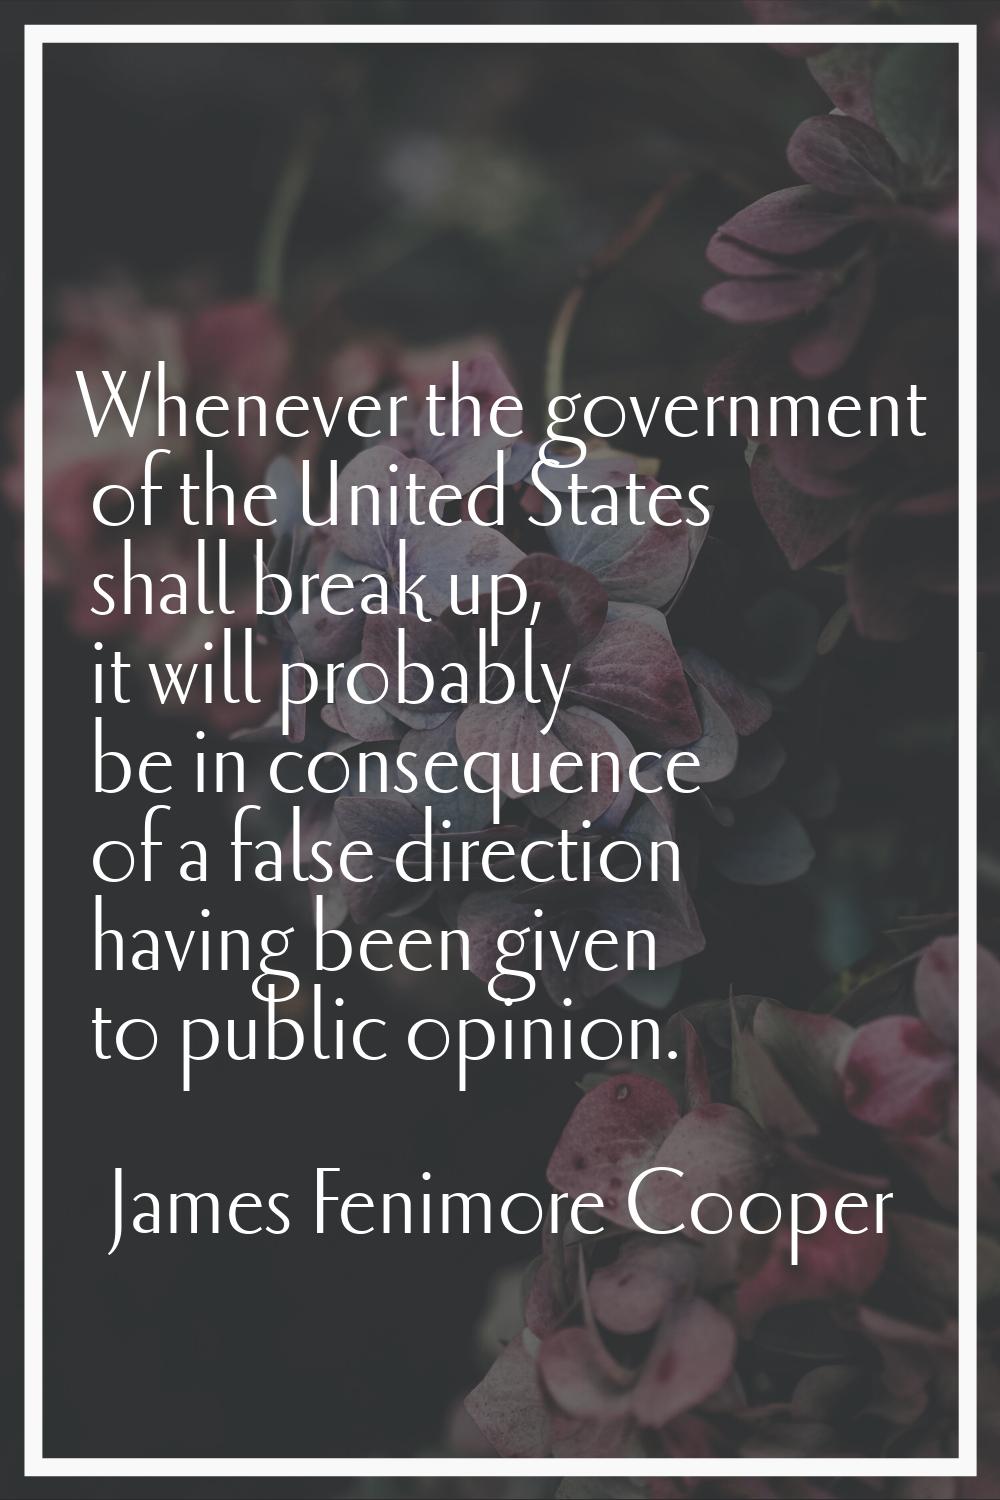 Whenever the government of the United States shall break up, it will probably be in consequence of 